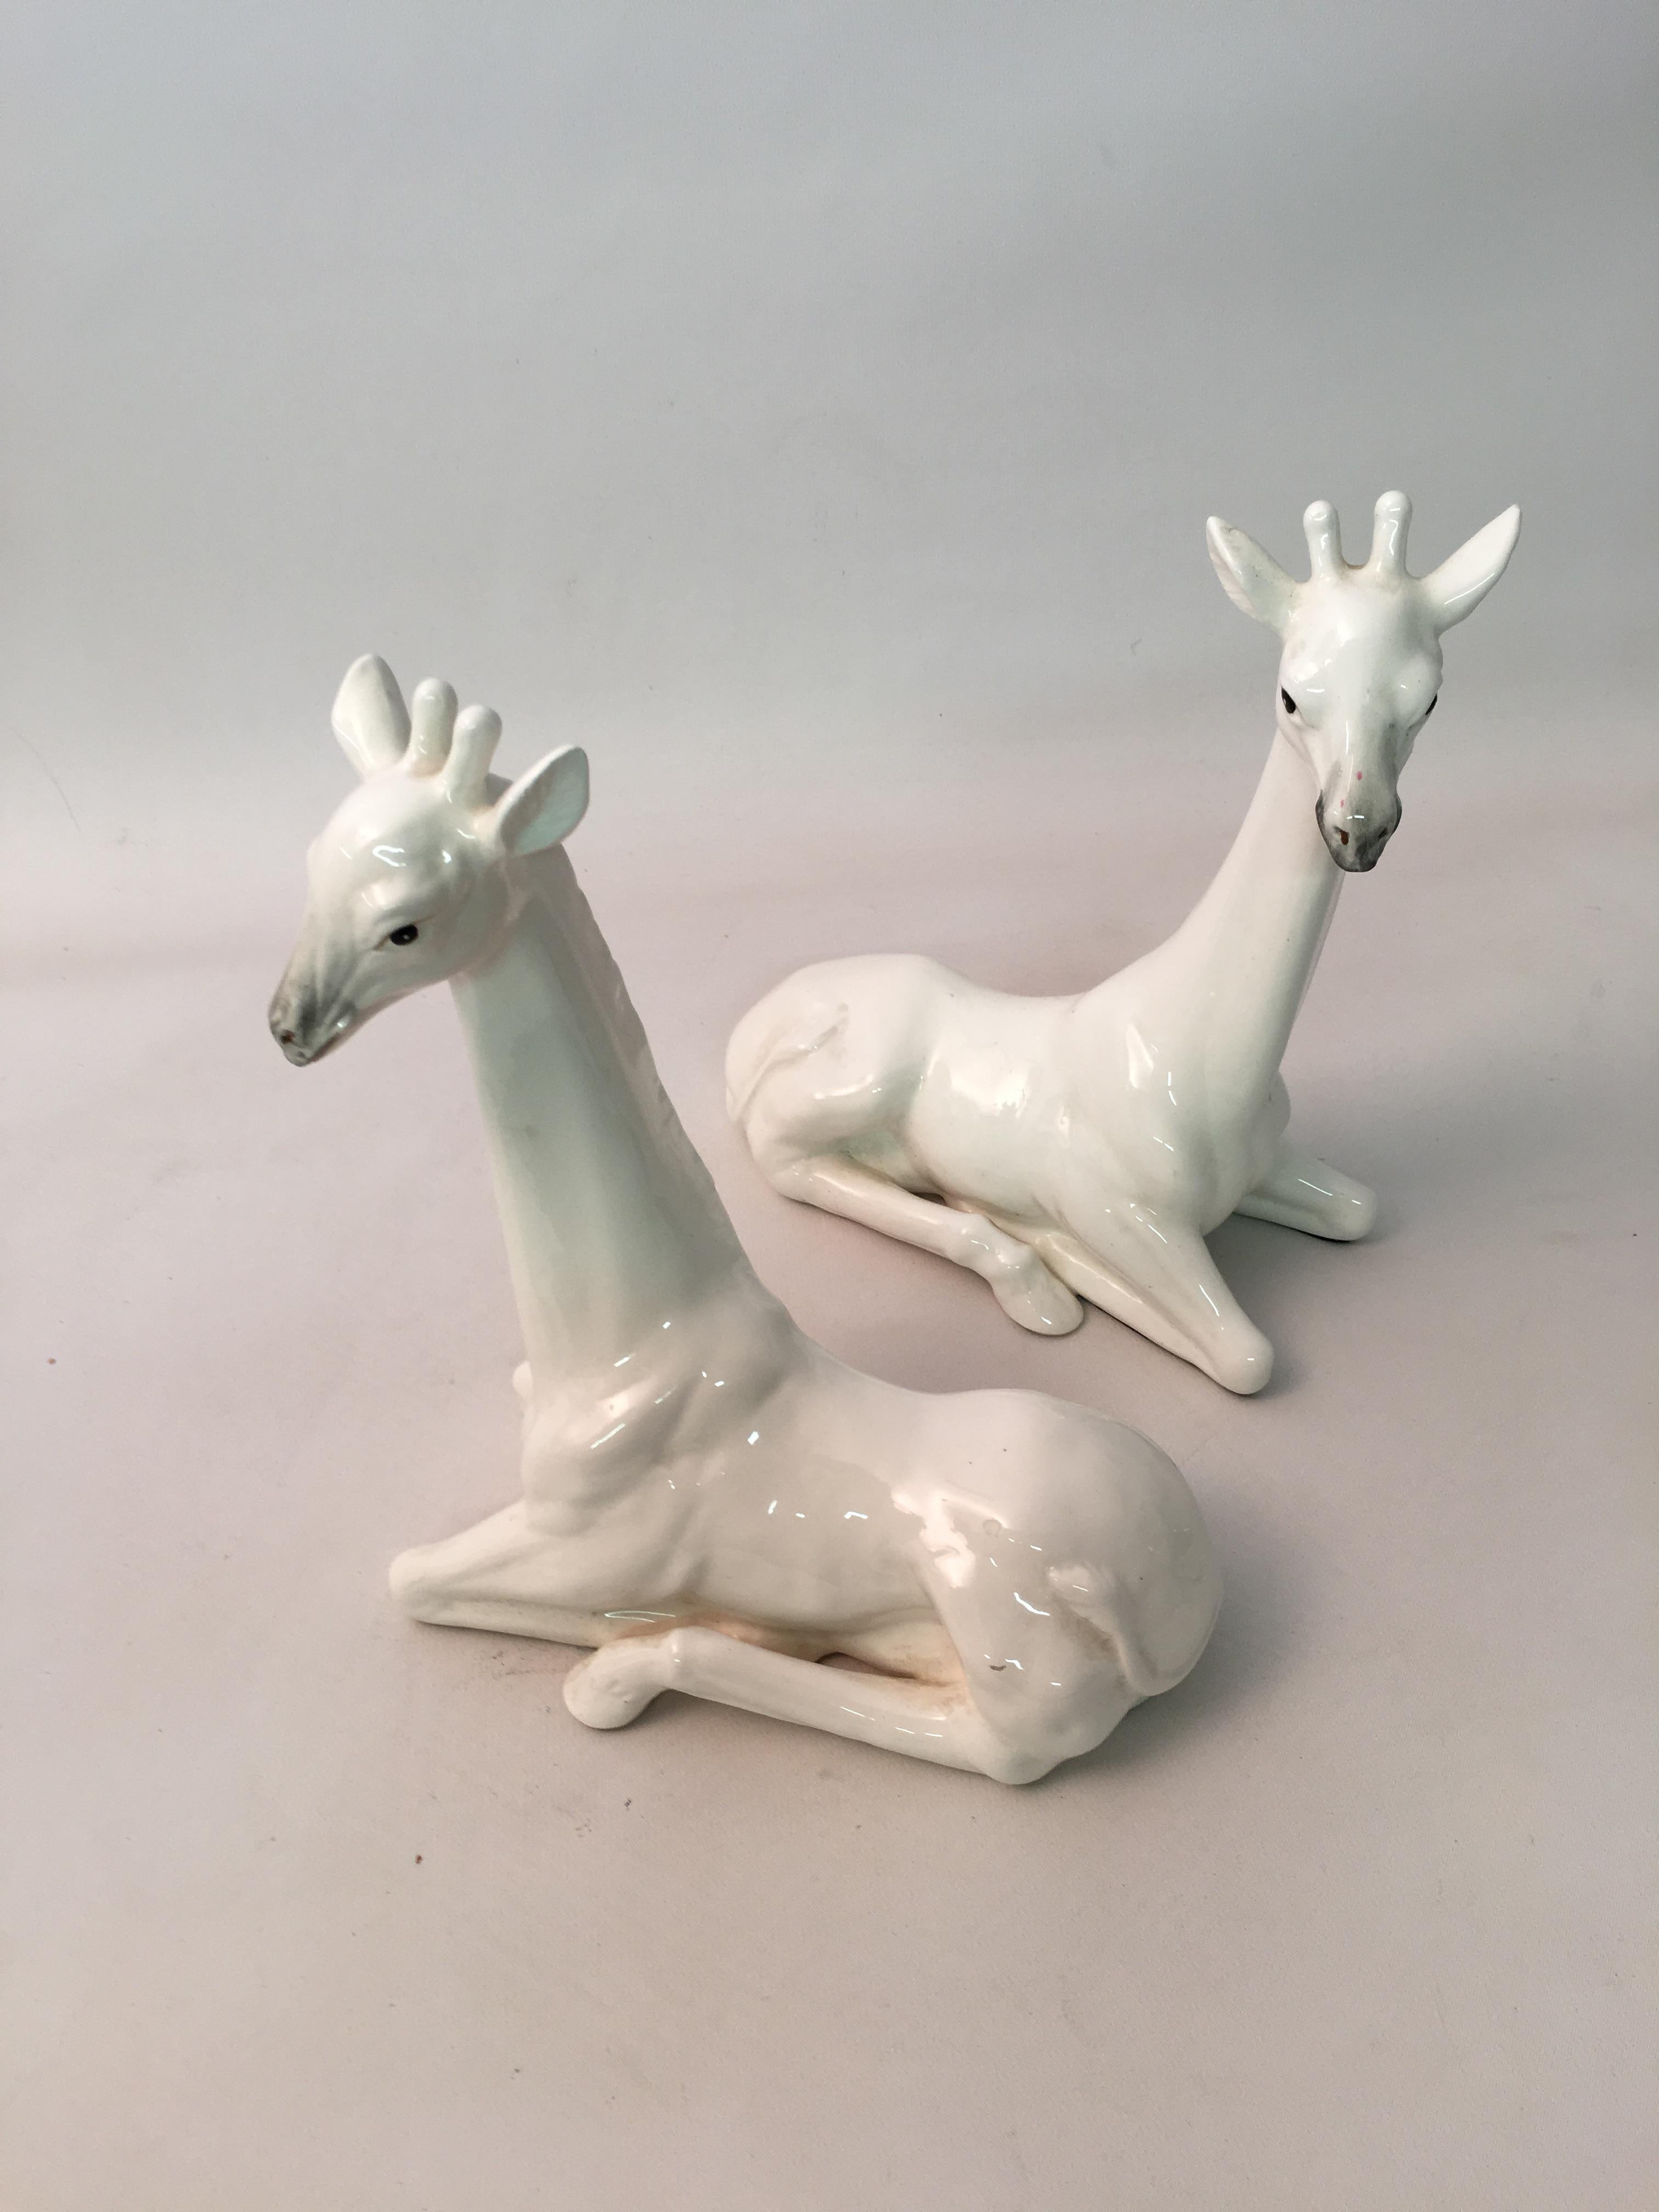 Beautiful pair of seated baby giraffes by Fitz and Floyd, Japan. High glaze white bodies and felted bottoms, circa 1970-1980.

Measures: Approximately 8